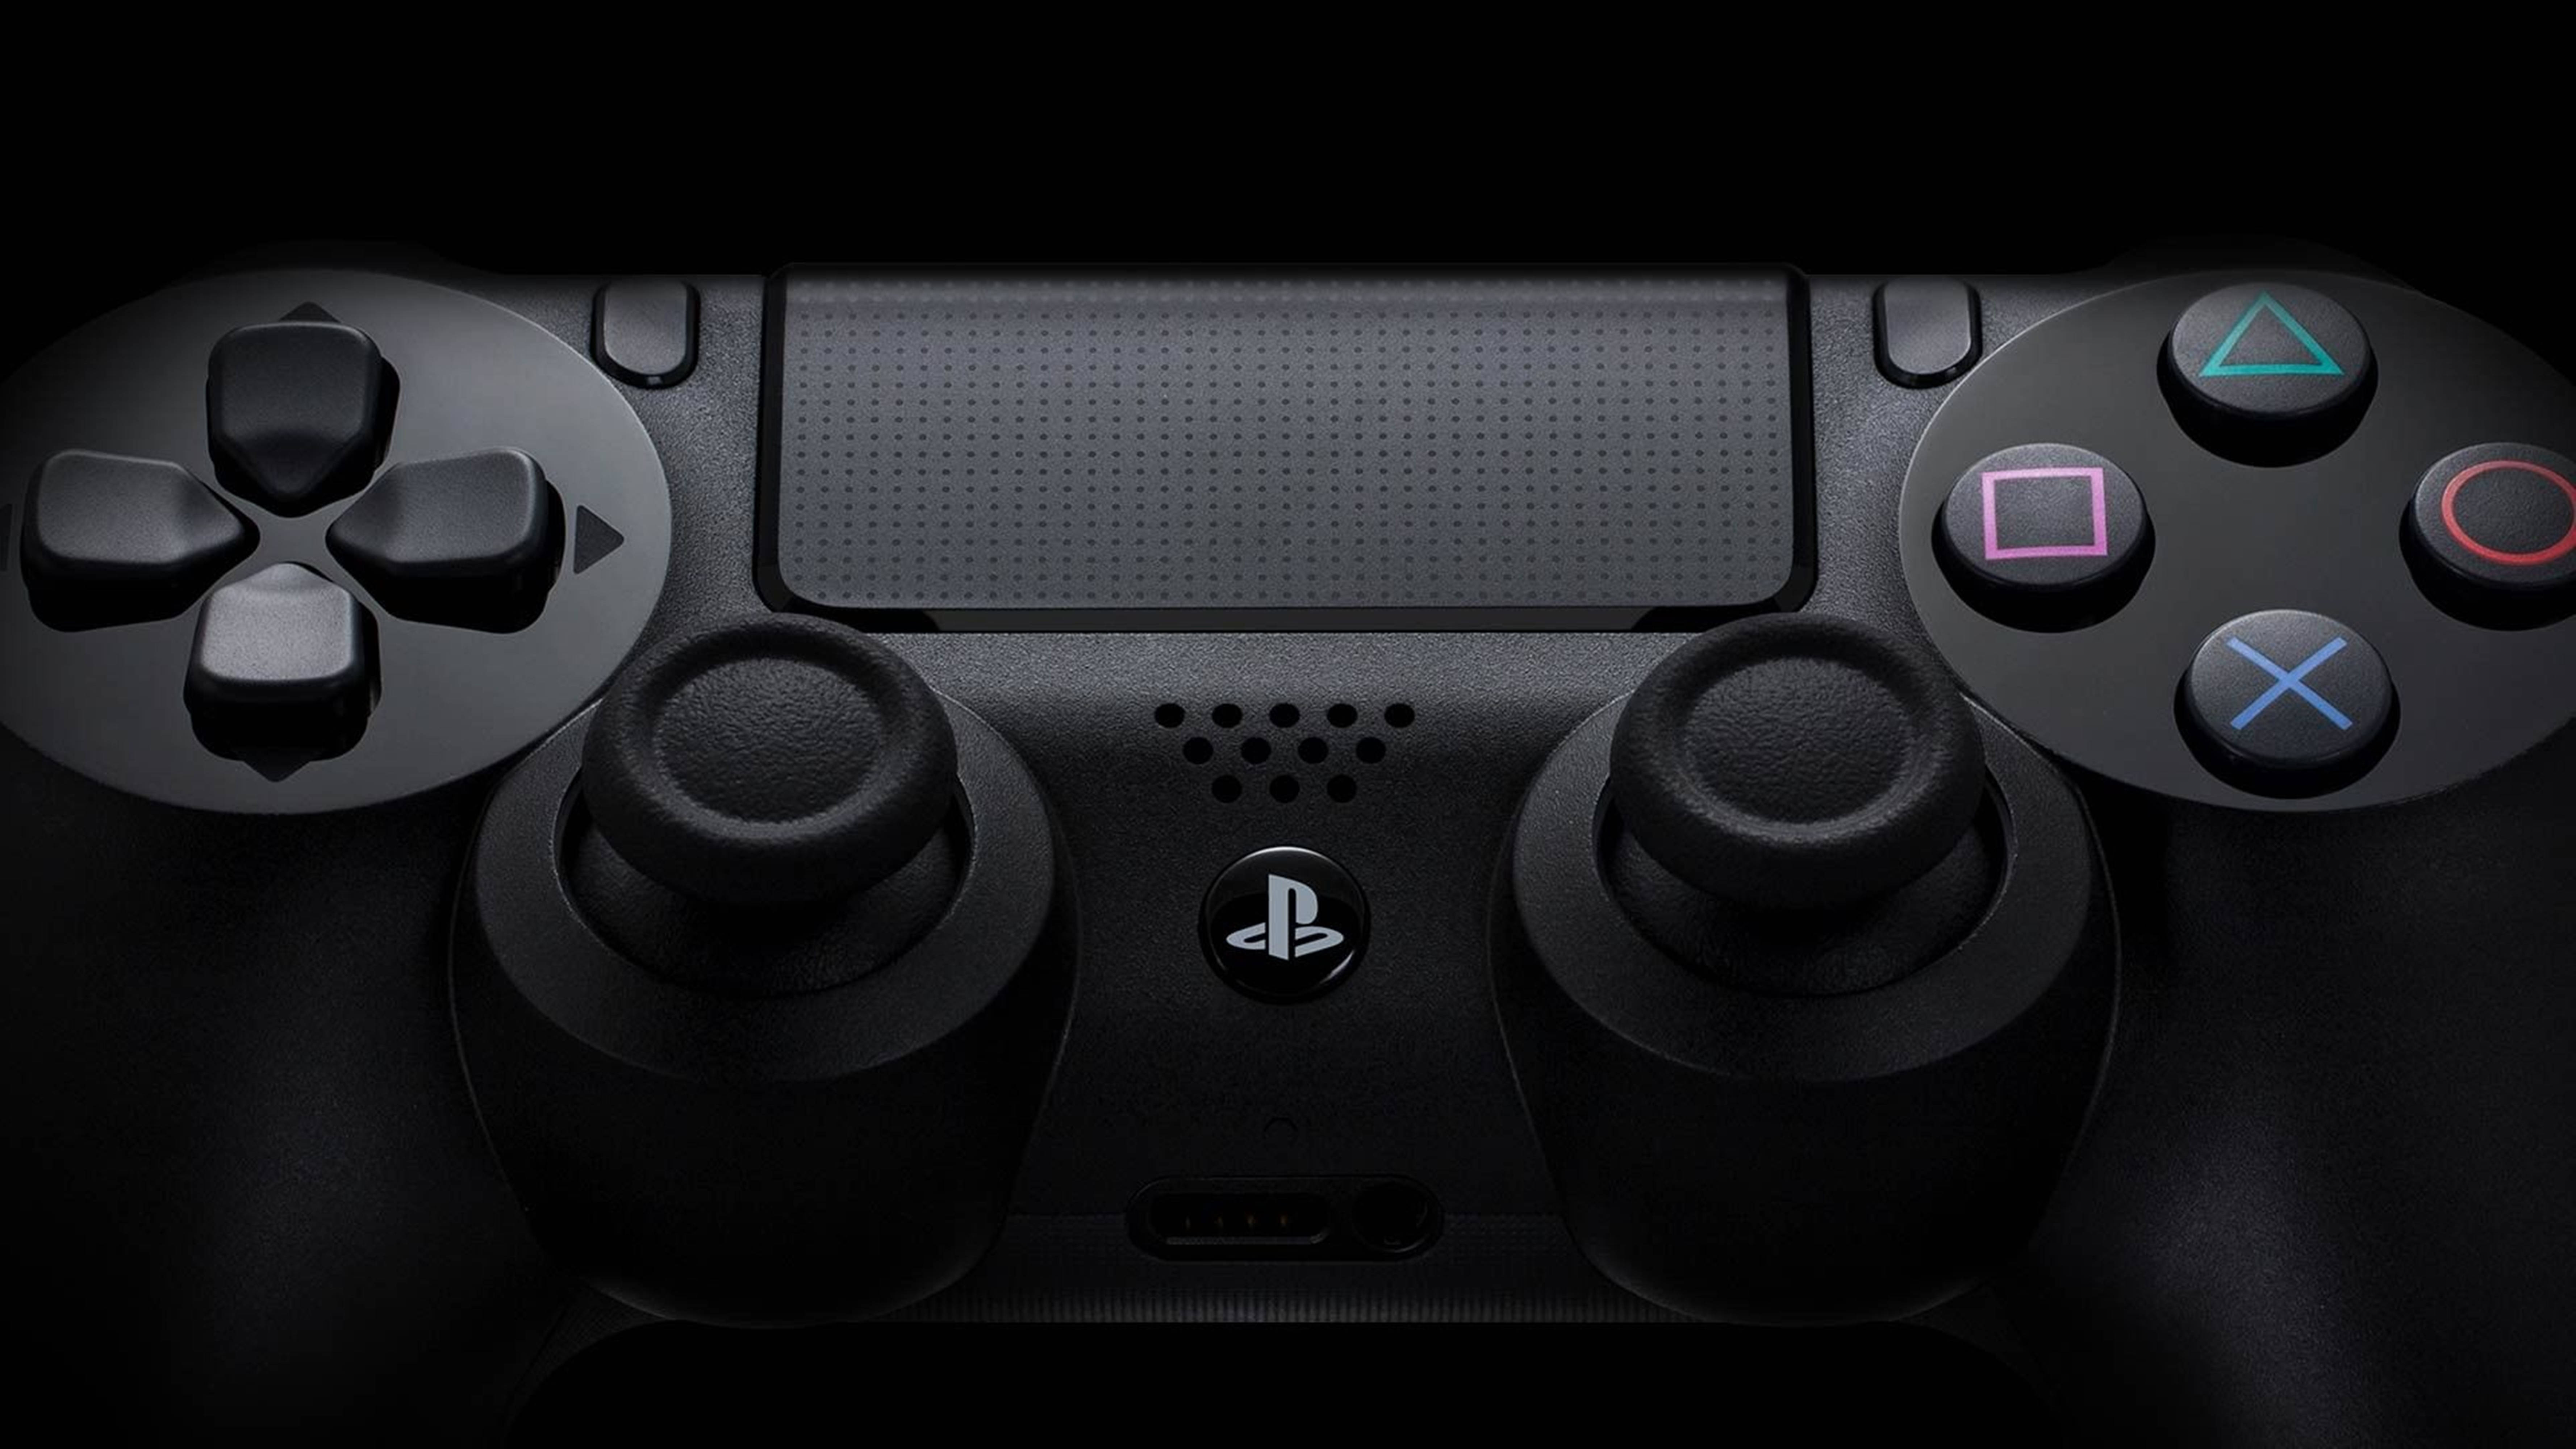 Ps4 3d. Ps4 Gamepad. Sony PLAYSTATION Dualshock 4 Wireless Controller. Ps5 Dualshock 5.